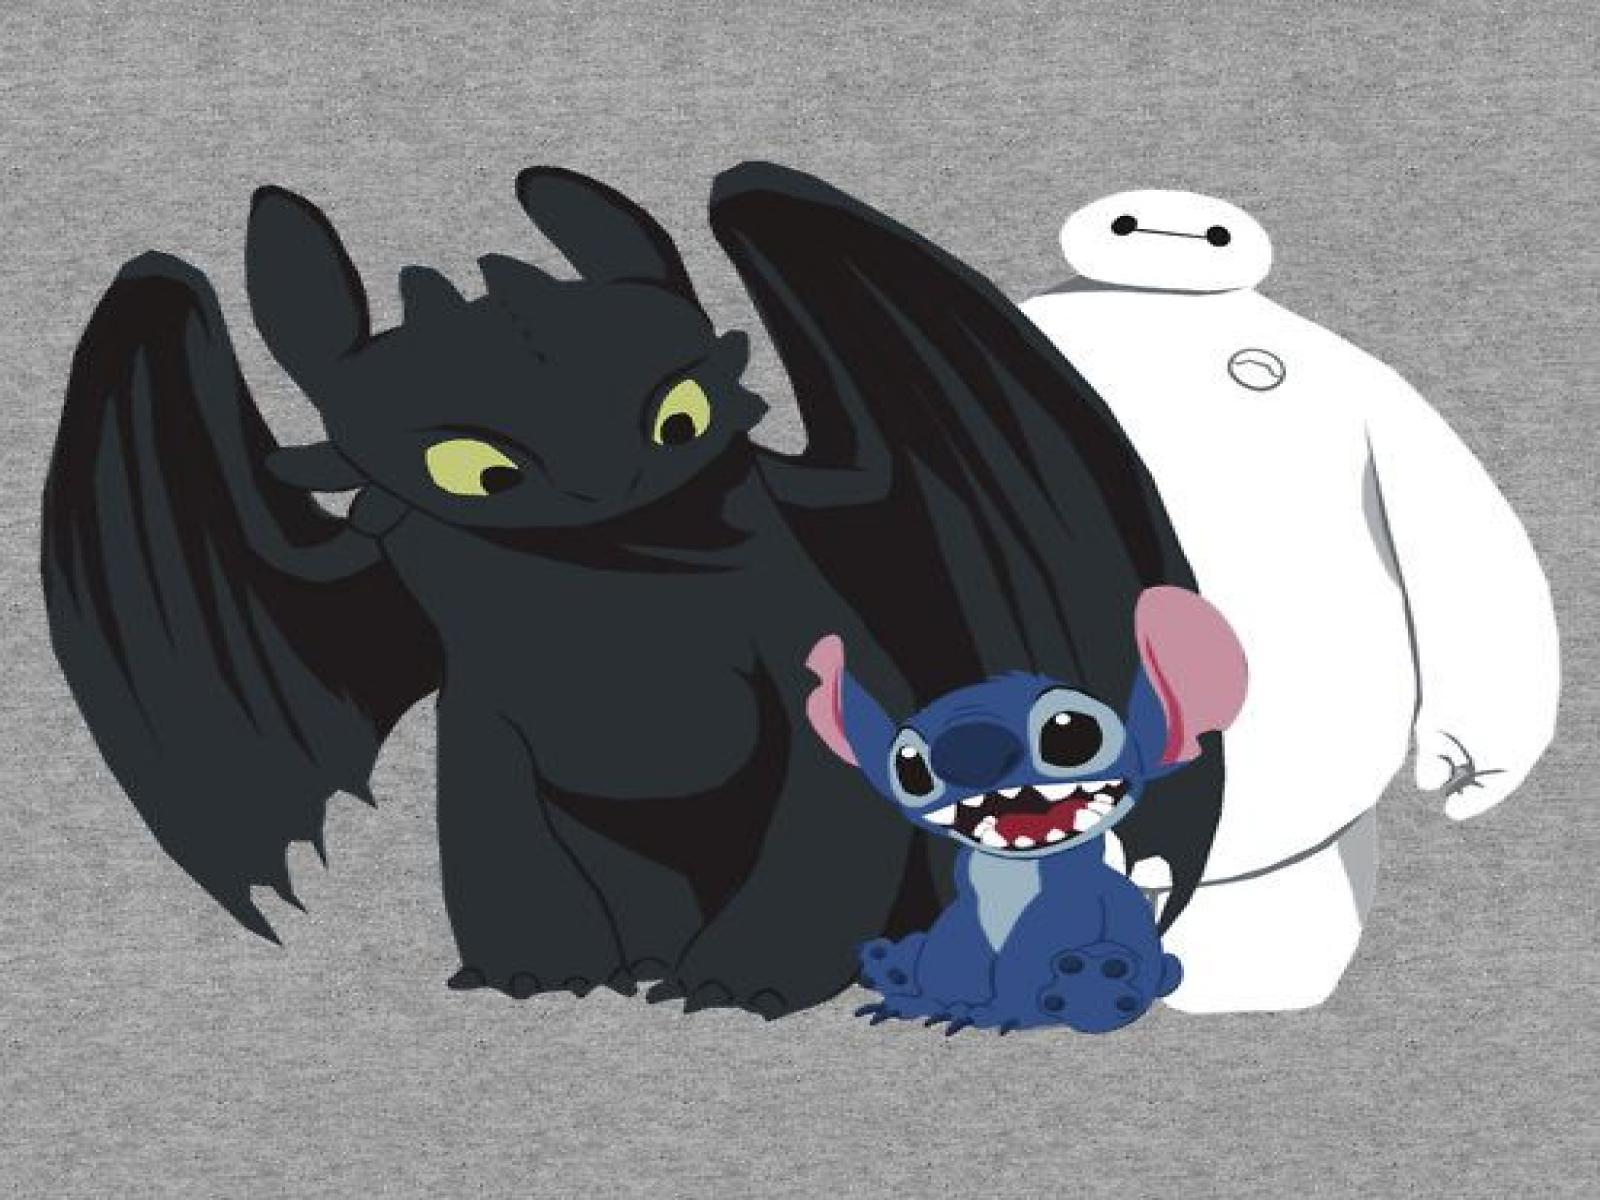 Toothless And Stitch Wallpaper 550x550 px, VC